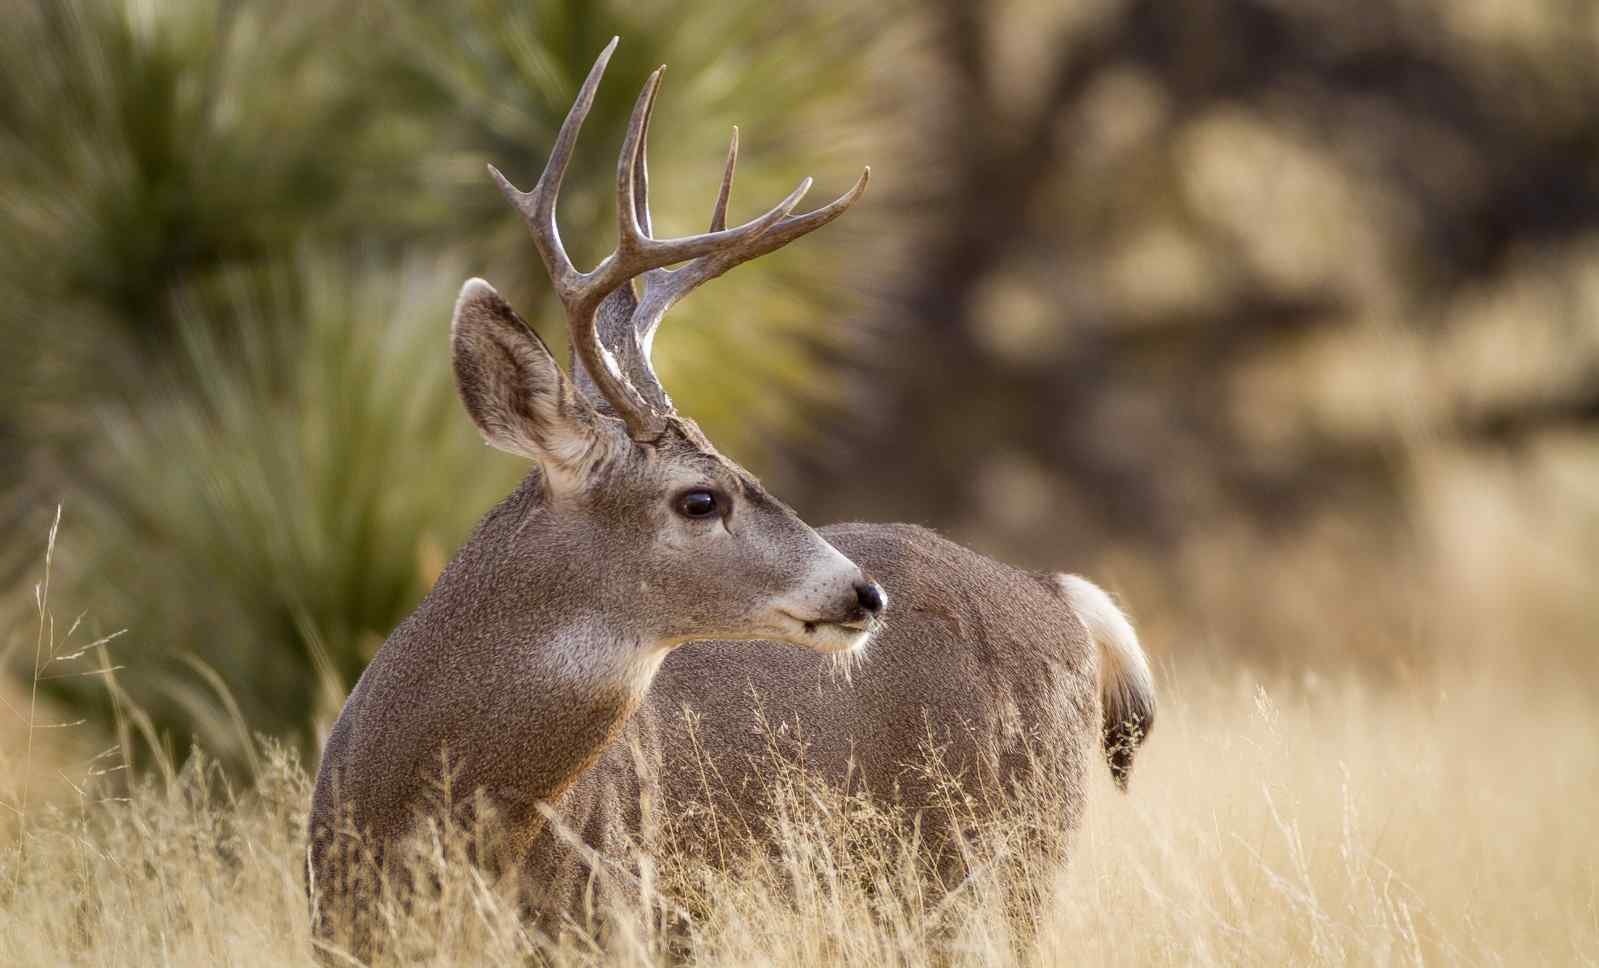 10. Facts about their antlers